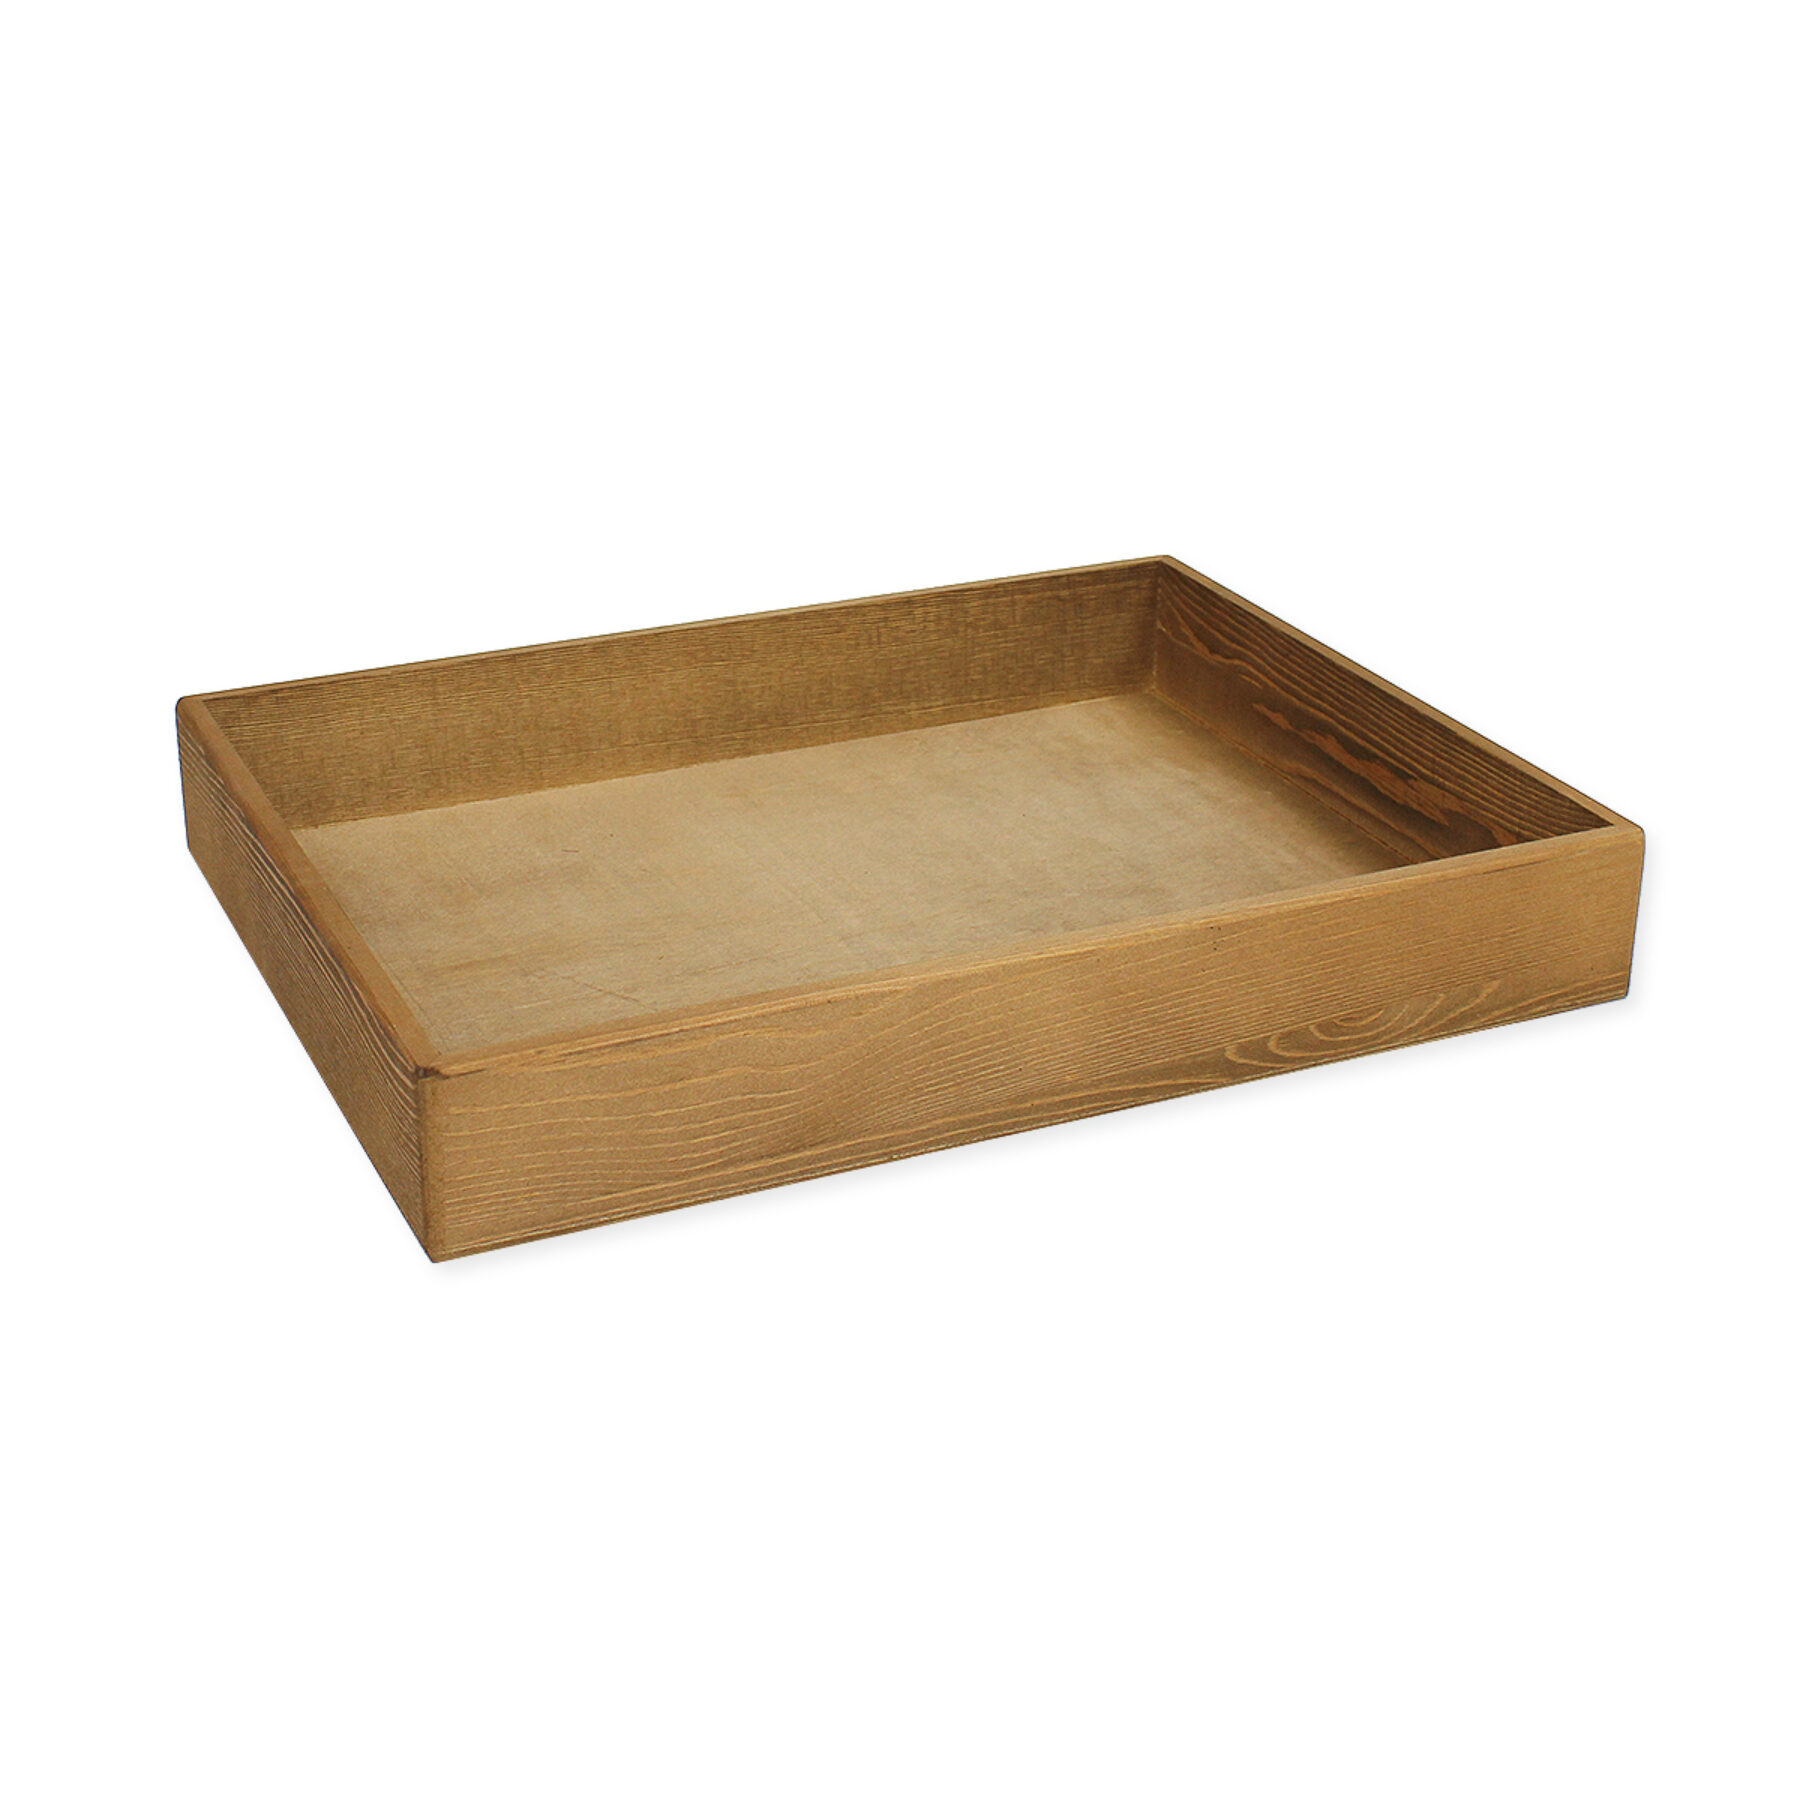 Large Wooden Display Tray